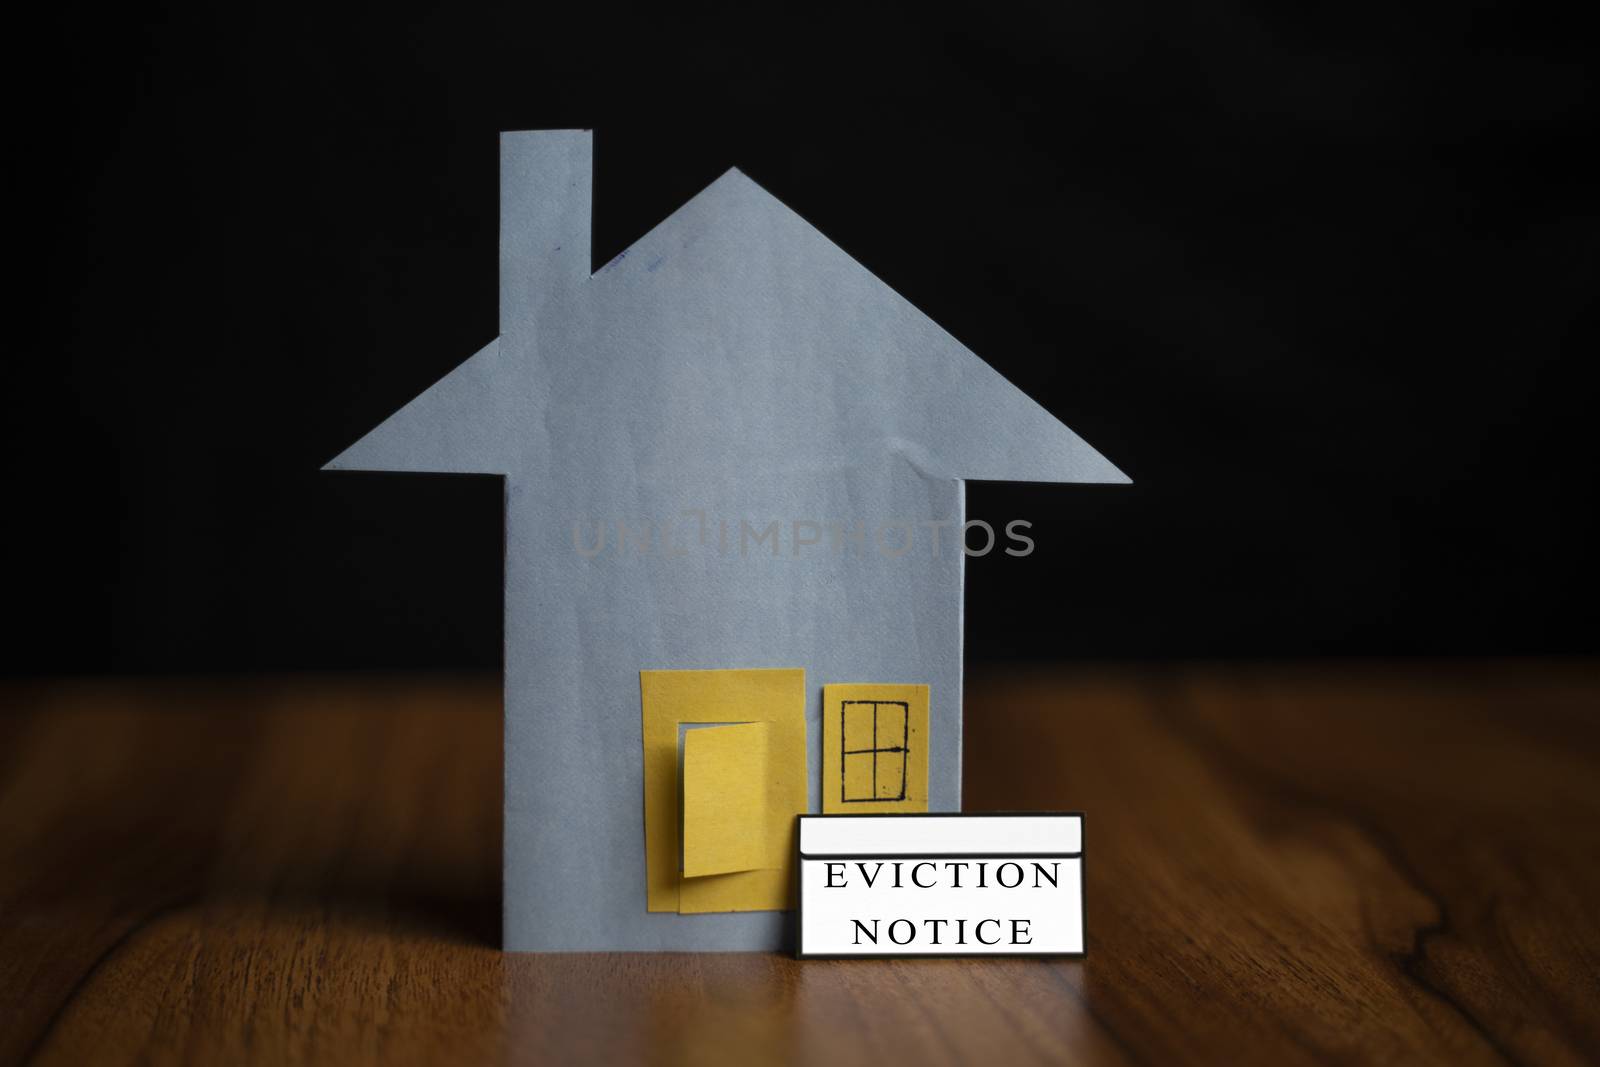 eviction notice sticker infront of door - concept showing of tenant foreclosure or rent pending on black background. by lakshmiprasad.maski@gmai.com